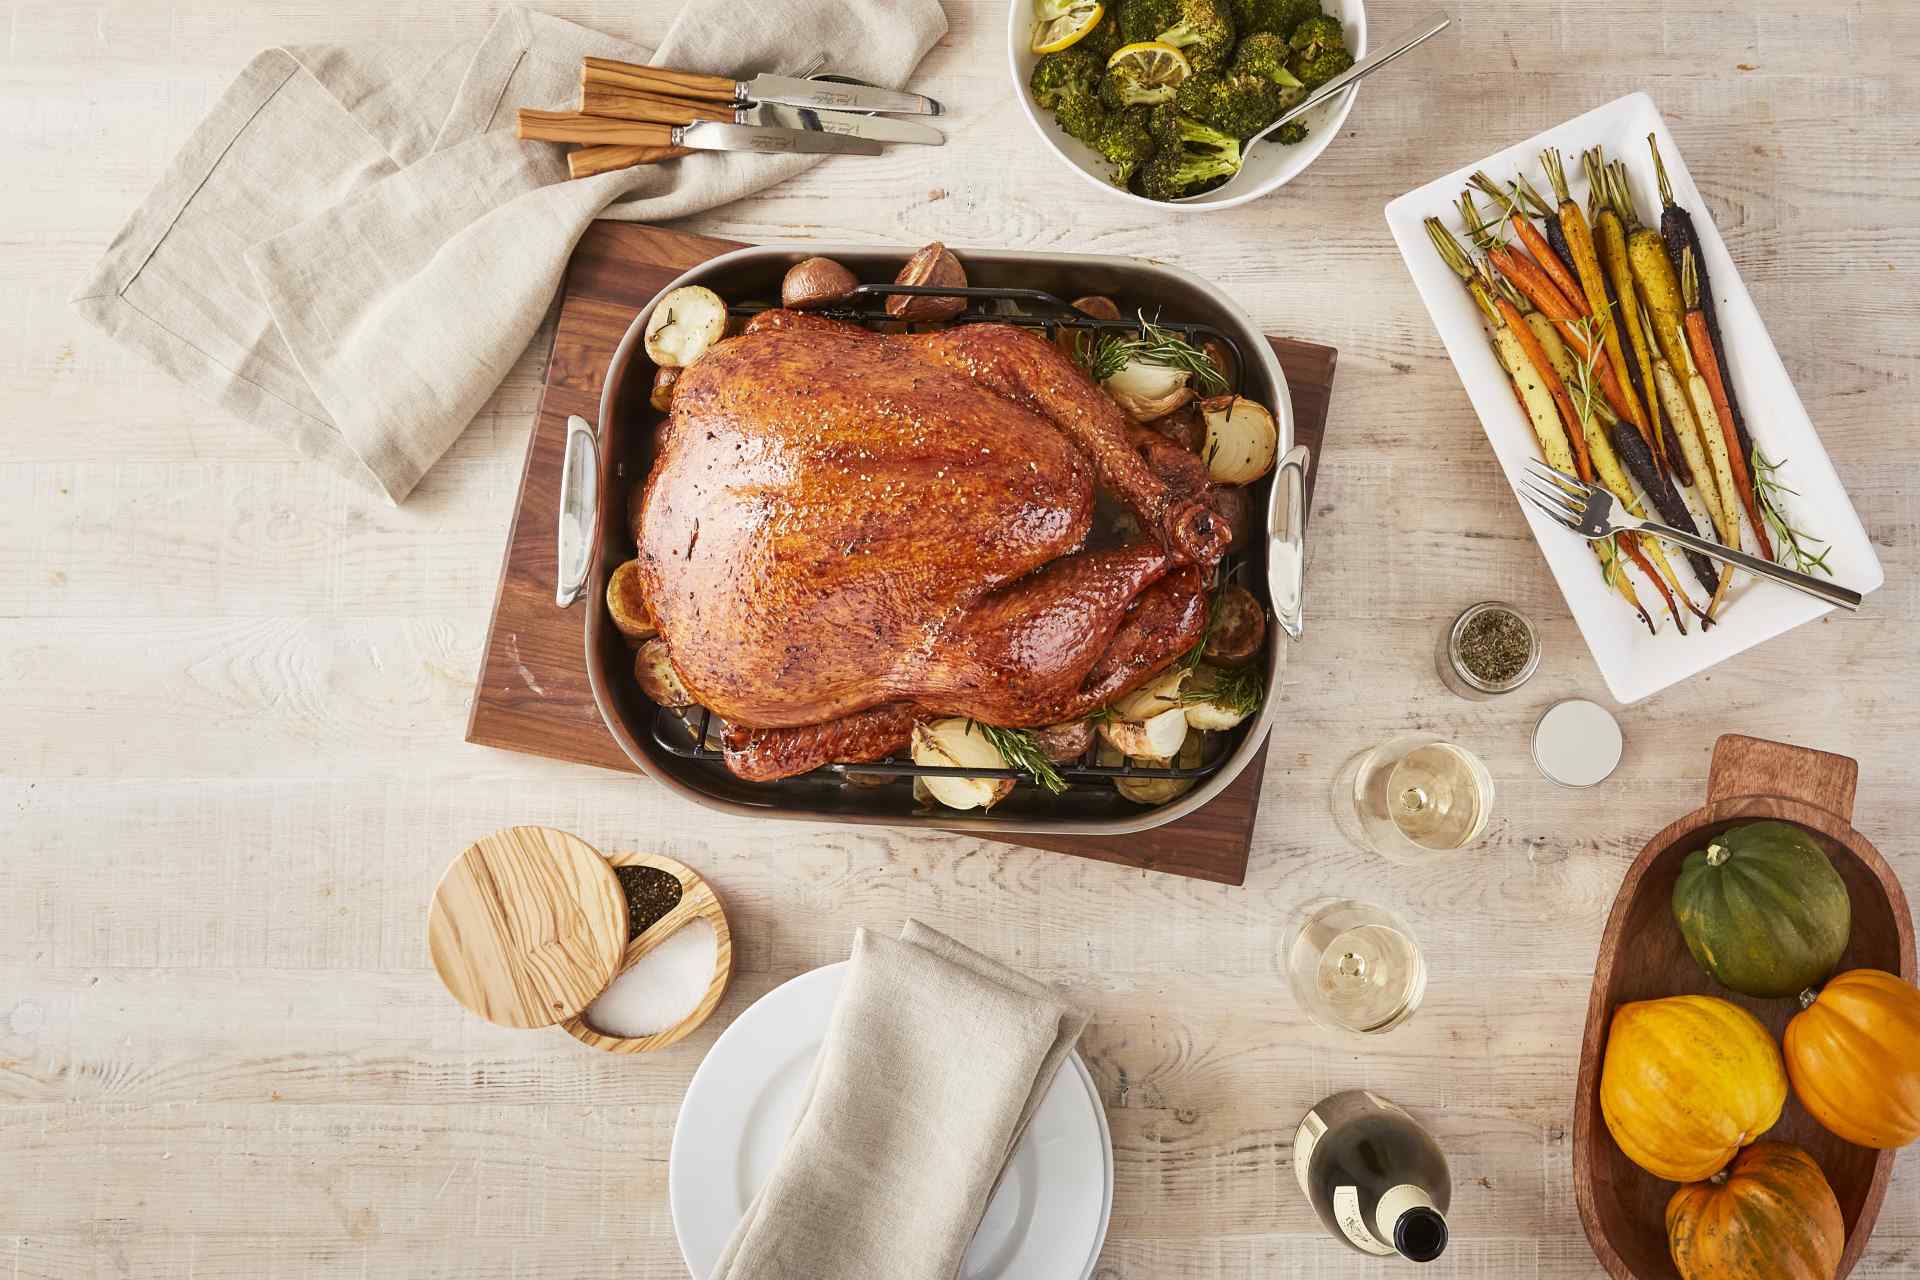 From Our Chefs: 10 Tips For A Stress-Free Thanksgiving